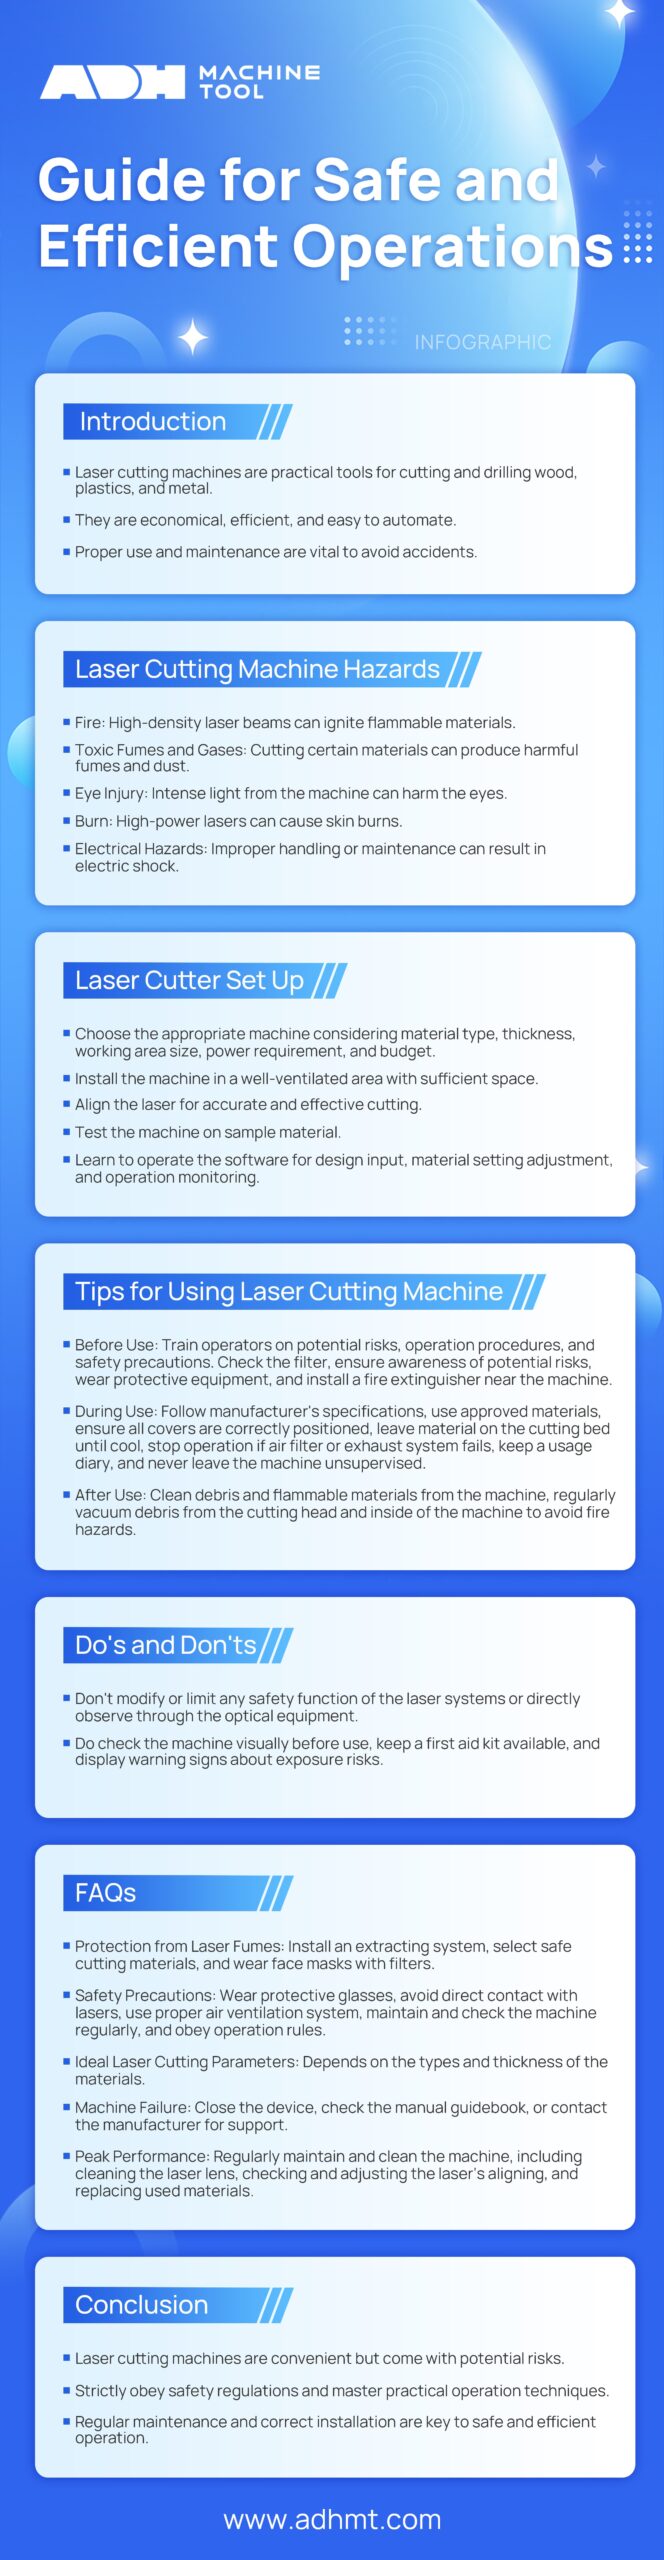 safe guide for laser cutting machine